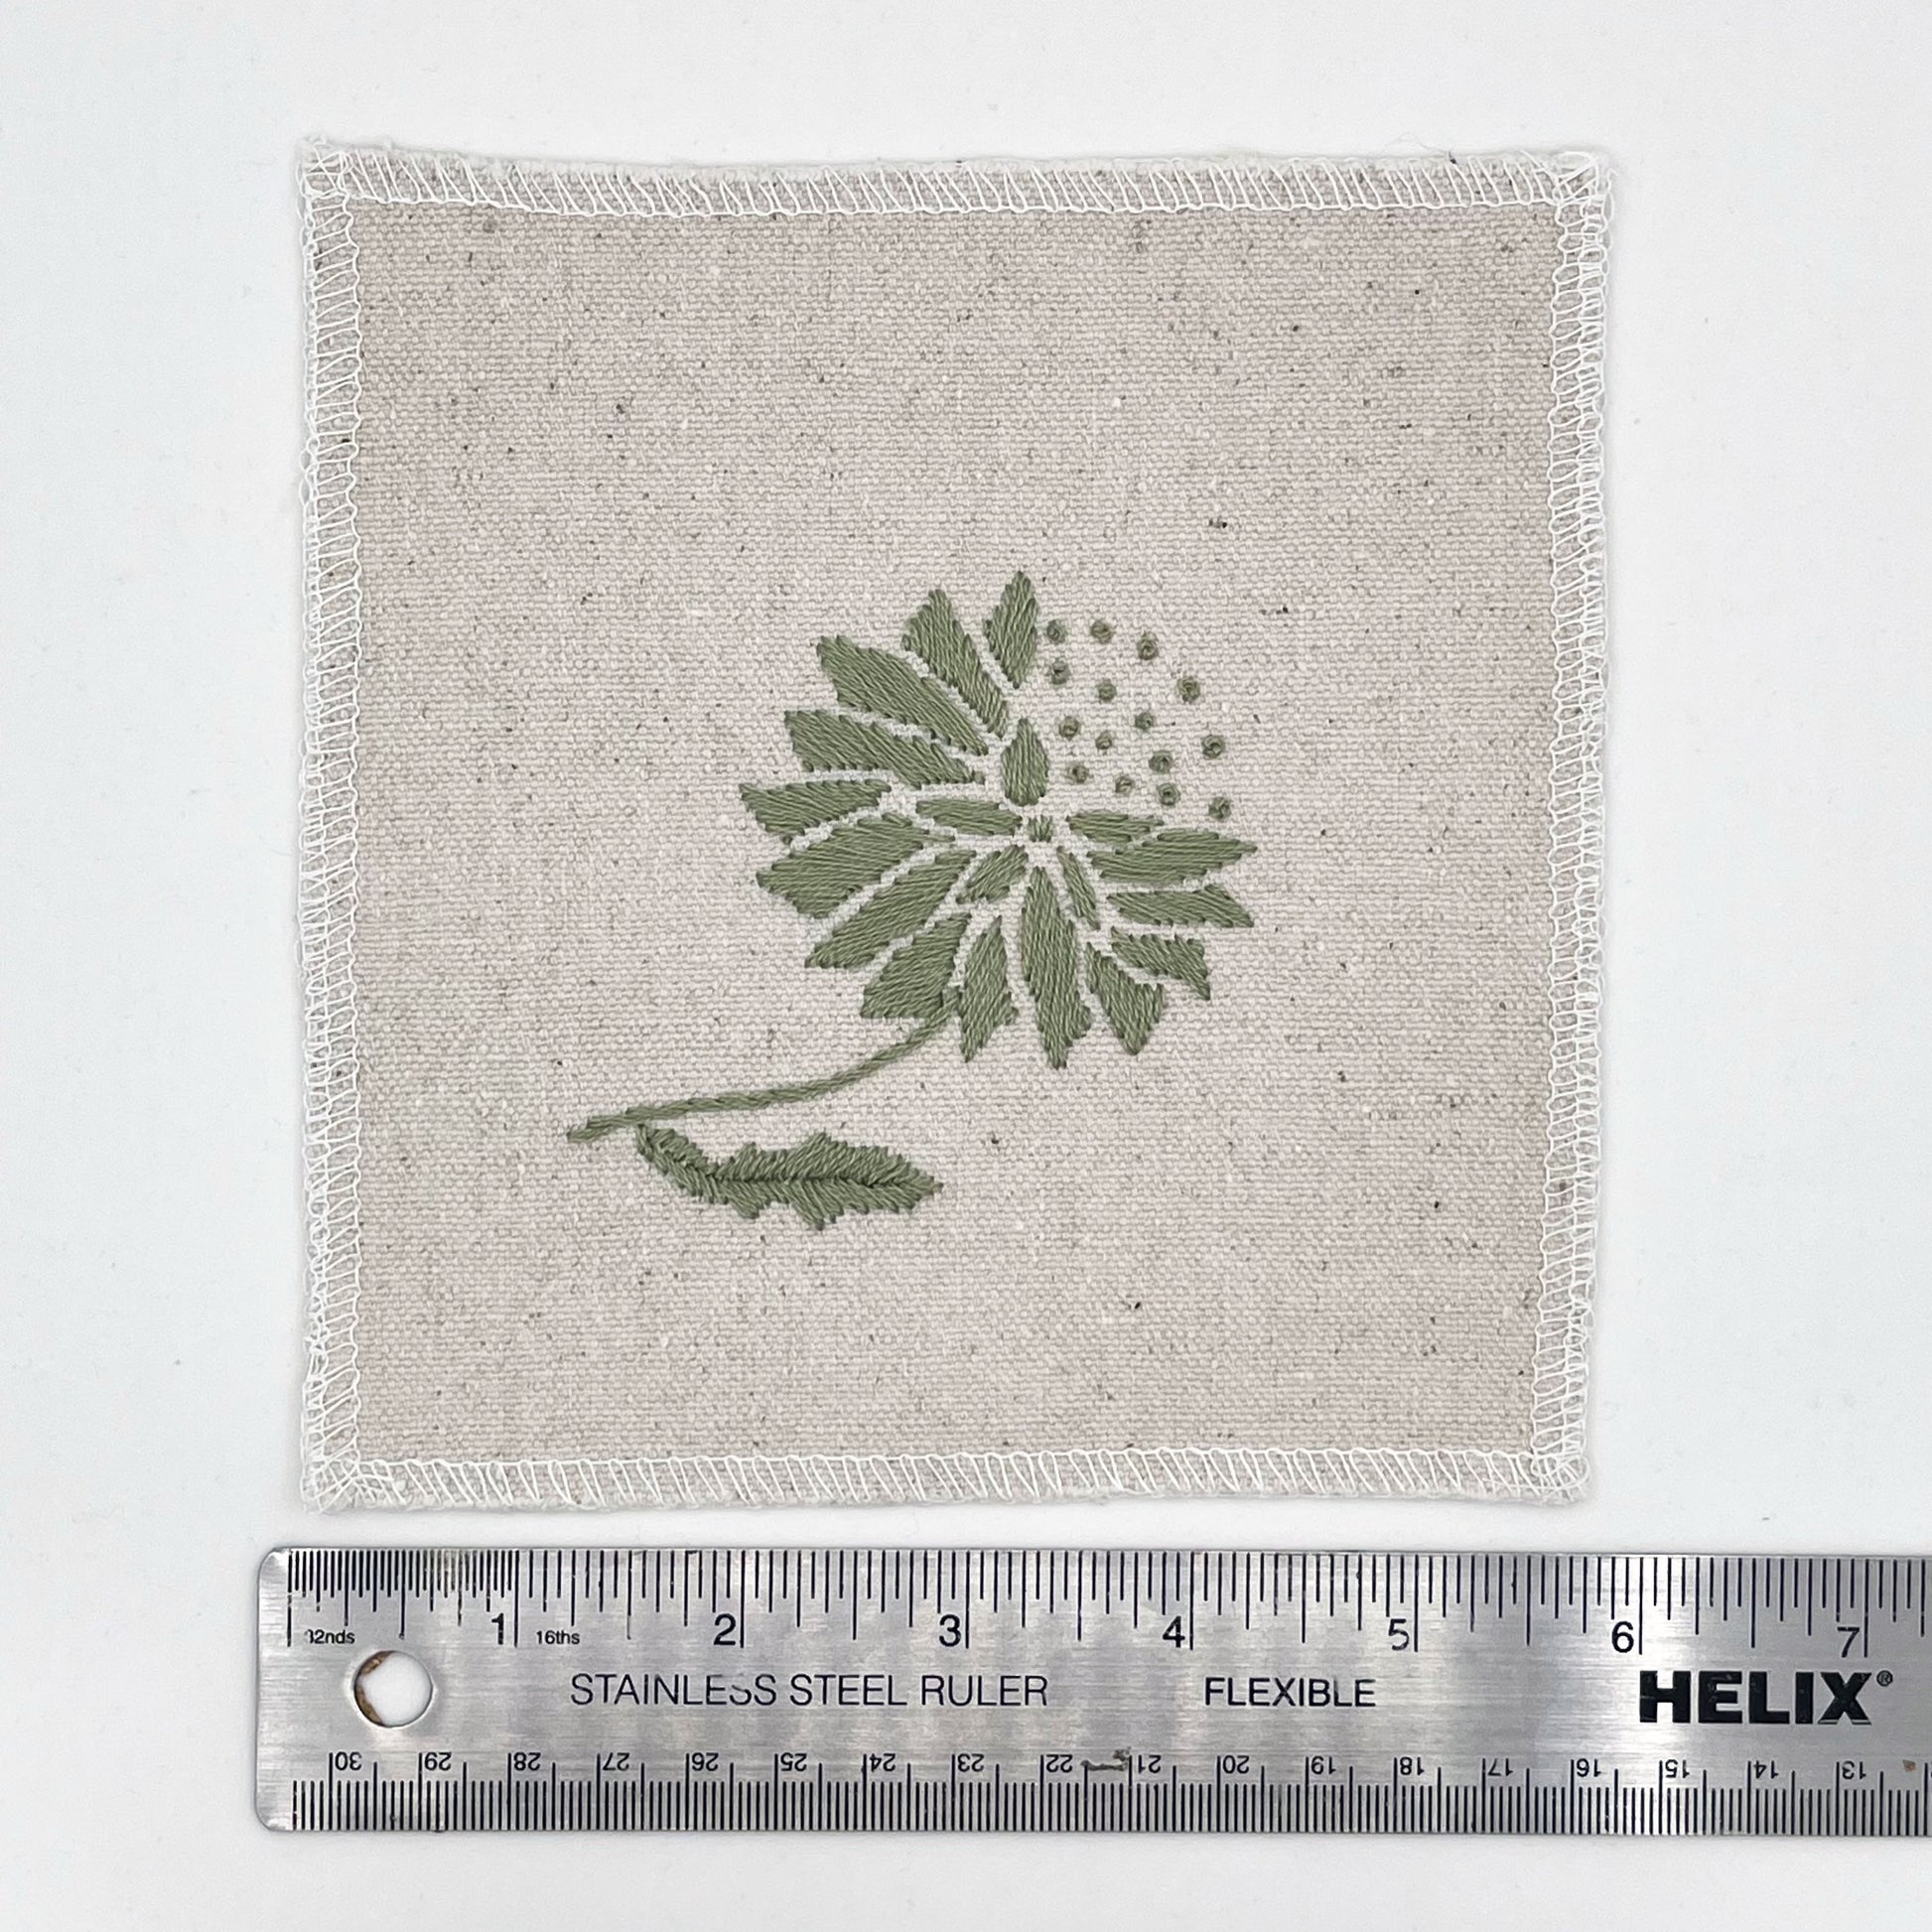 a square patch in natural colored fabric, hand embroidered with a sage colored abstract dandelion made mostly of petals, with a quarter of them replaced with french knots, with overlocked edges, next to a metal ruler to show a width of six inches